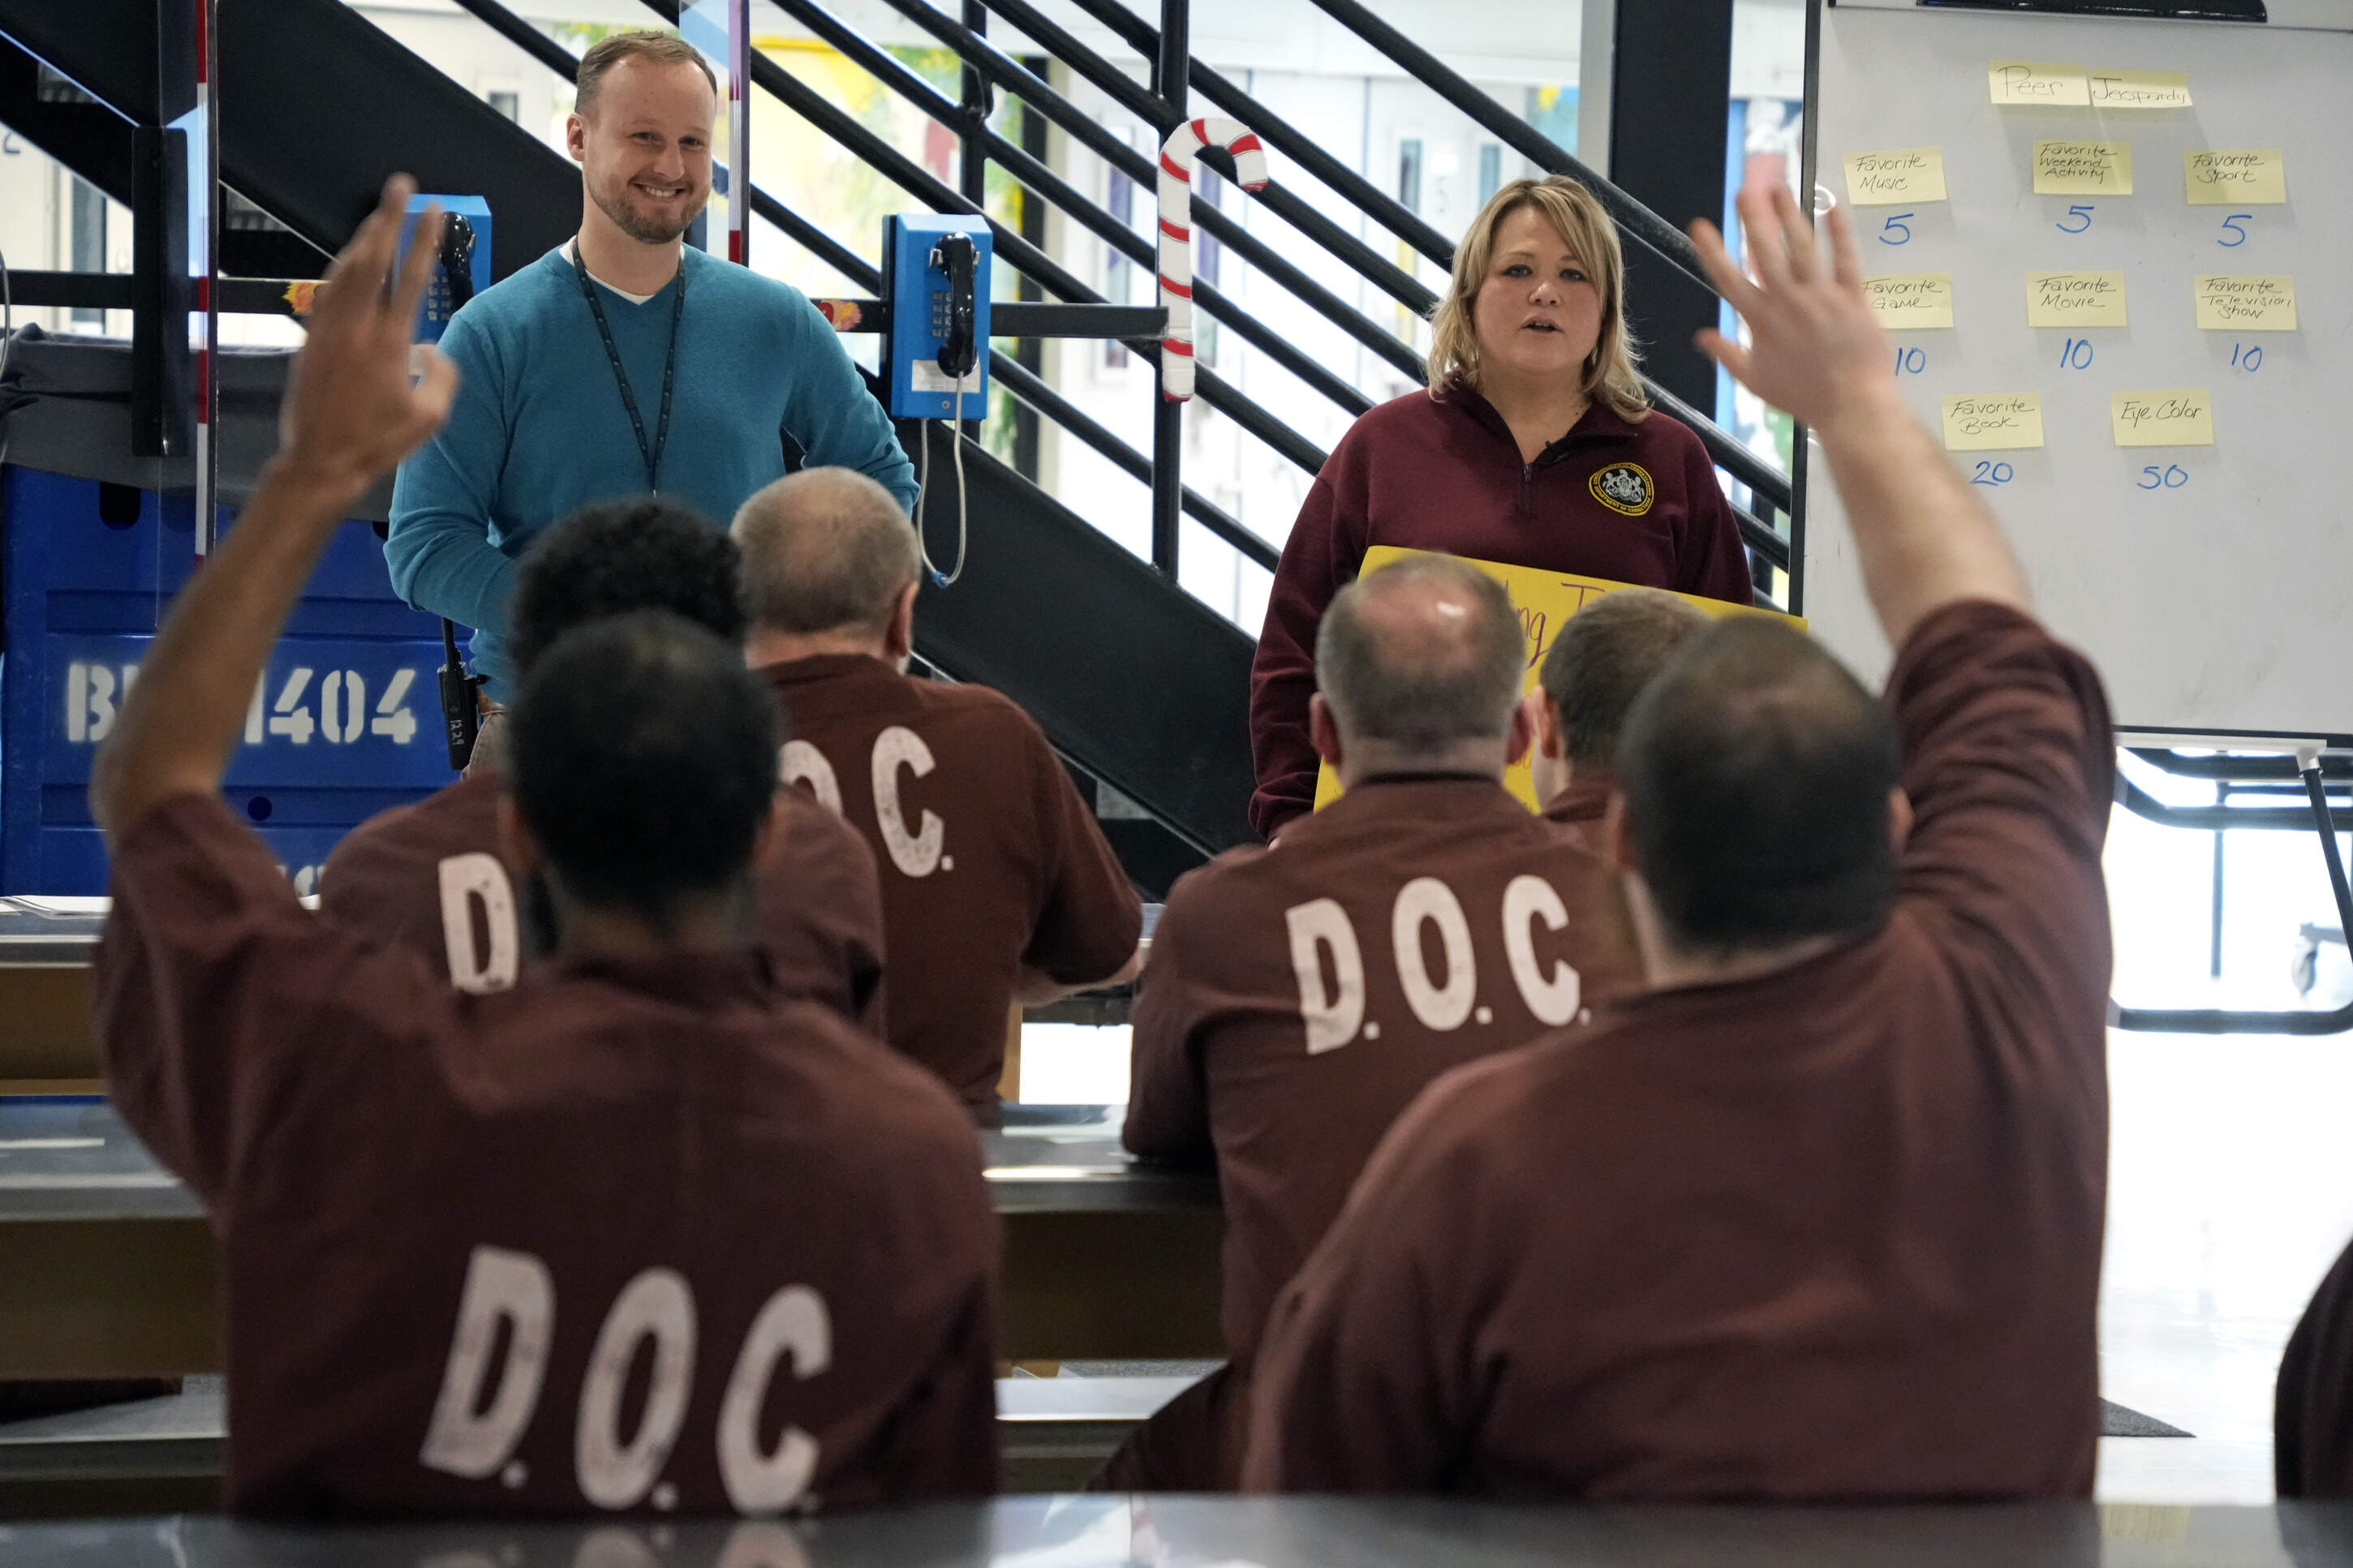 Prison psychological specialists Christine Ransom, top right, and Randy Kulesza, top left, lead a group session for inmates, Dec. 14, 2023, in the Neurodevelopmental Residential Treatment Unit at Pennsylvania's State Correctional Institution in Albion, Pa. The prison unit is helping men with autism and their intellectual and developmental disabilities stay safe behind bars while learning life skills. The unit is the first in the state and one of only a handful nationwide. (Gene J. Puskar/AP)